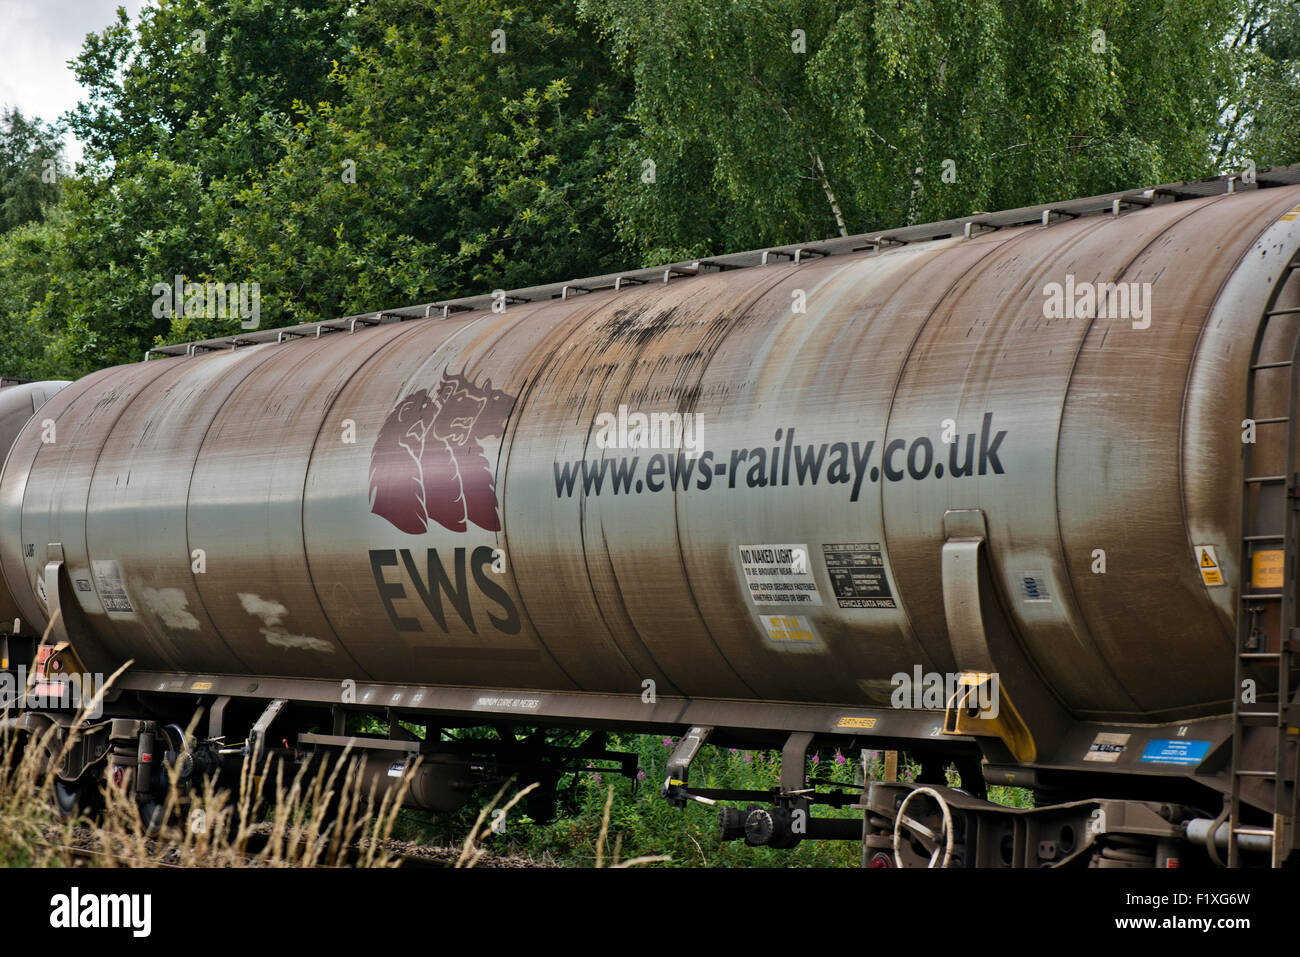 EWS tankers/cargo containers on railway line next to the Whisby Nature Park, Near Lincoln, Lincolnshire, UK Stock Photo